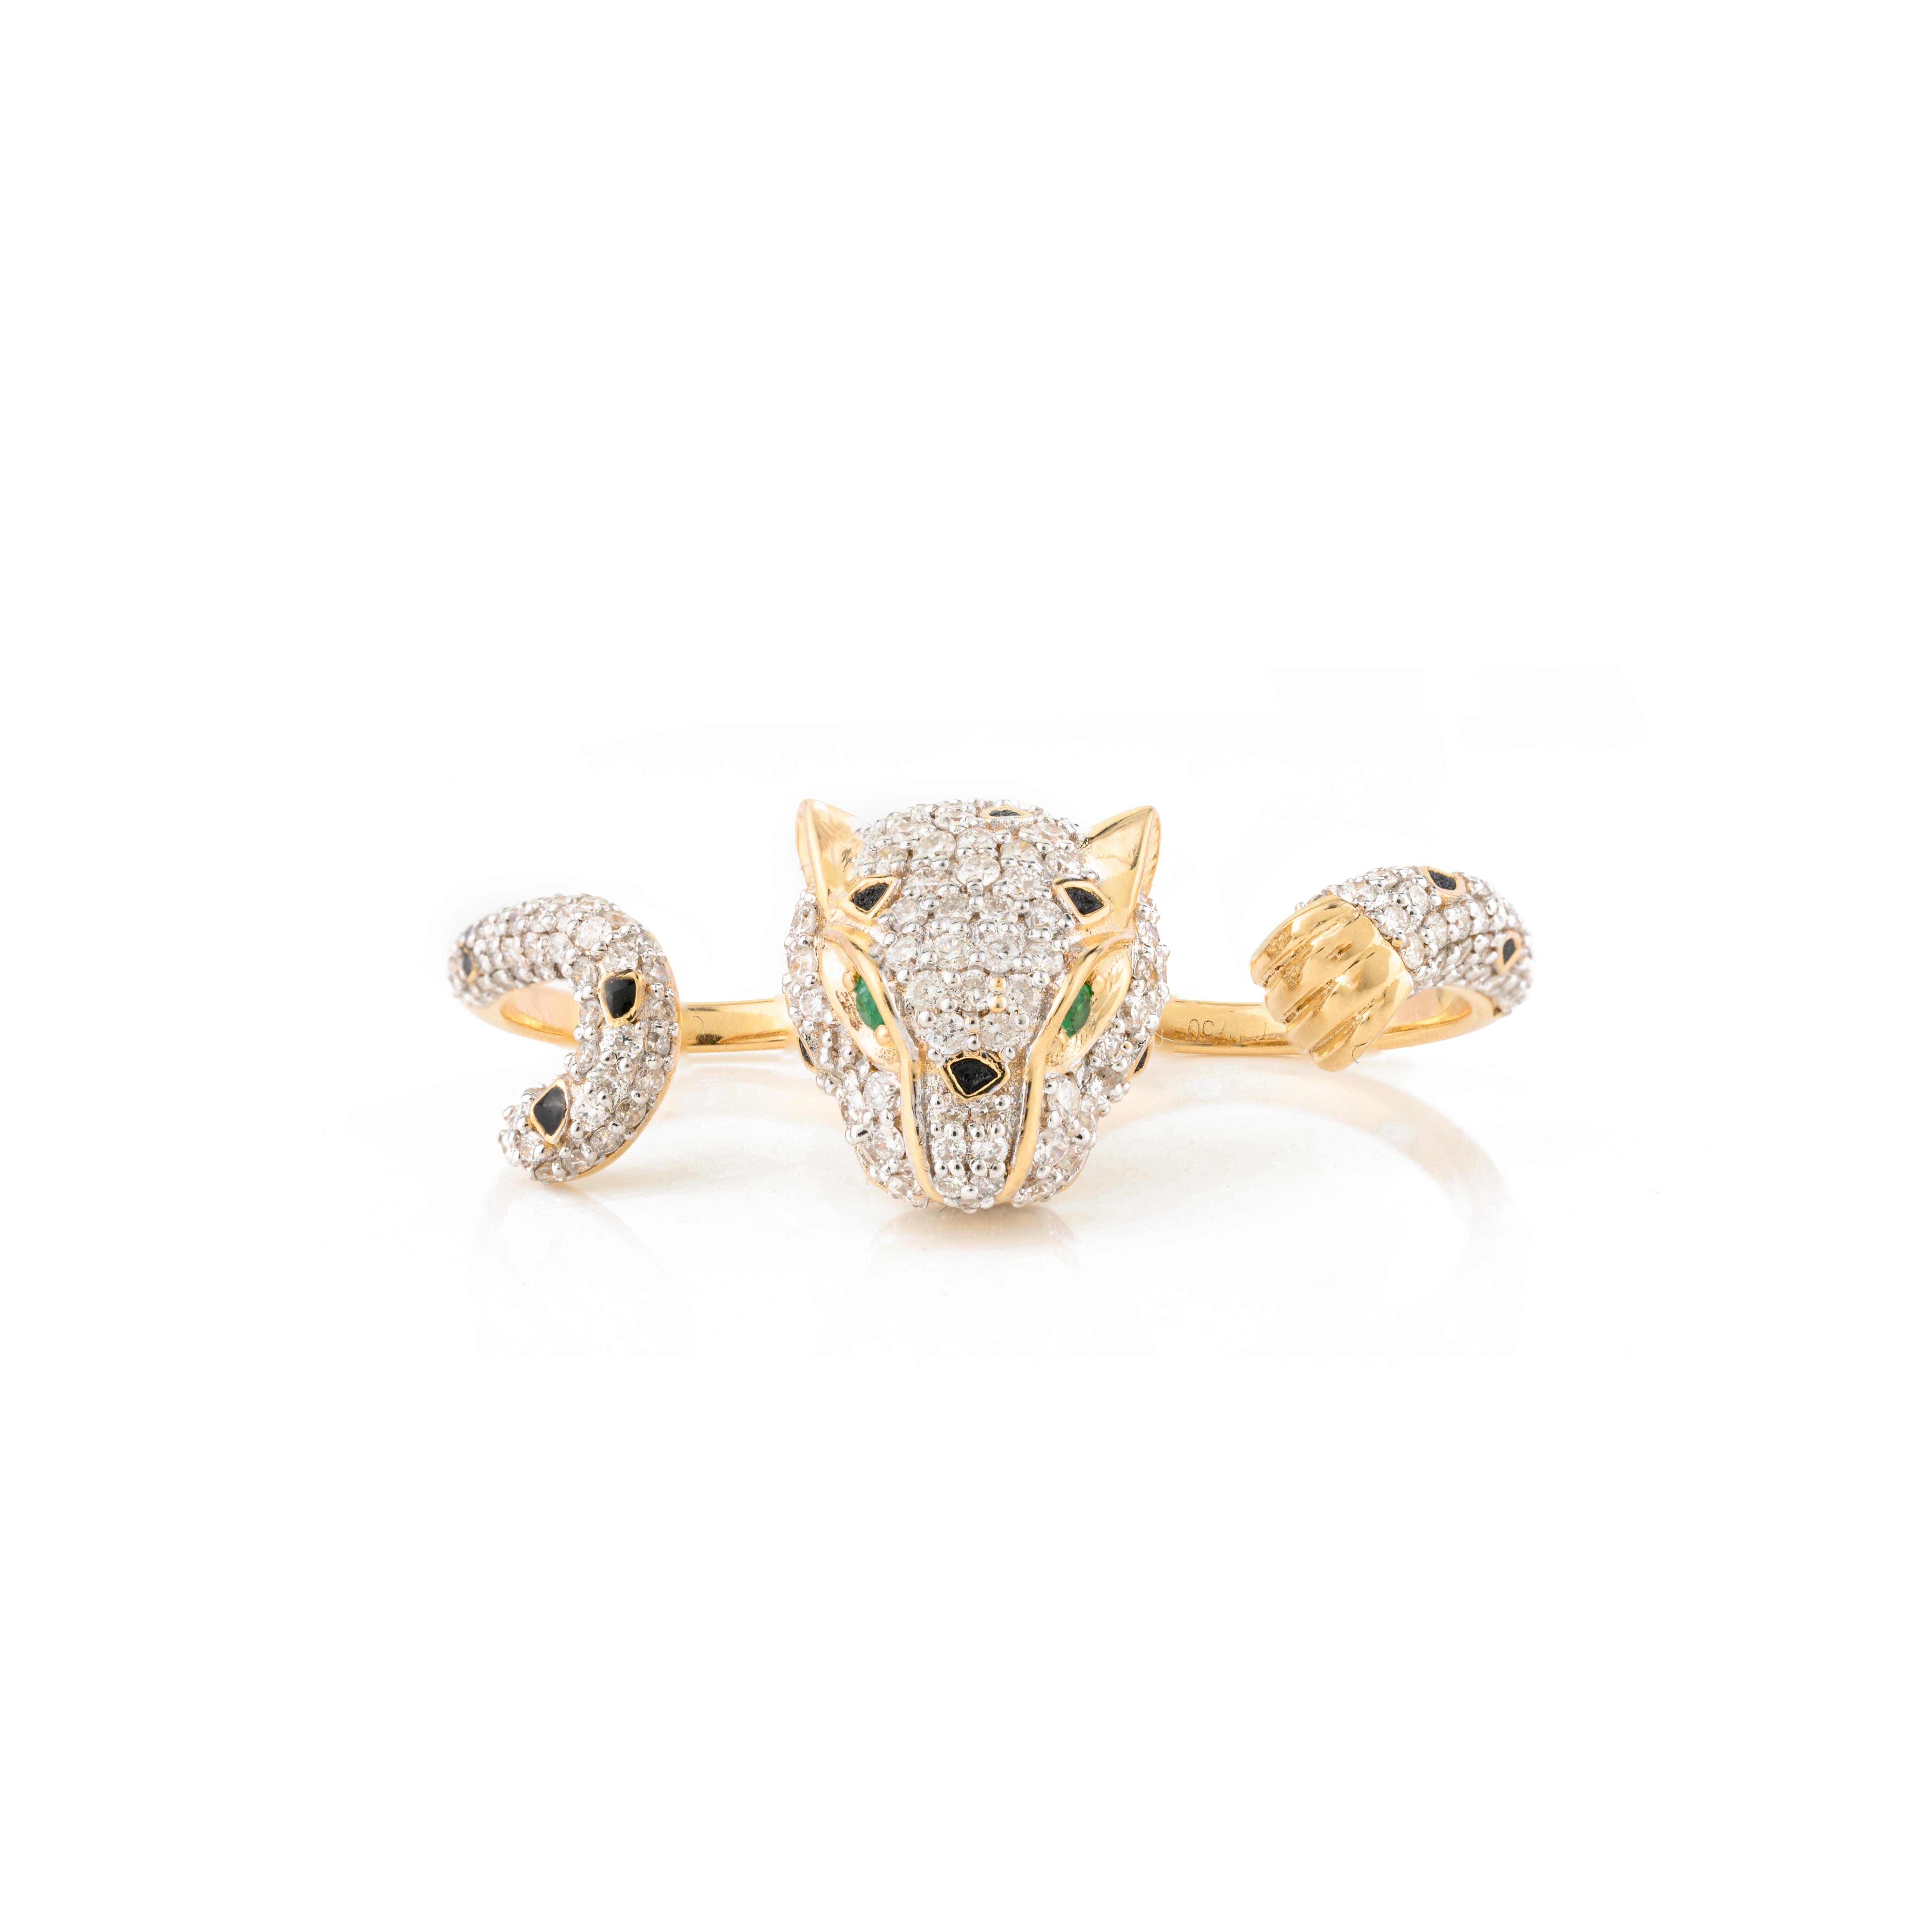 For Sale:  Statement 2.06 Carat Diamond Panther Double Finger Ring in 18k Yellow Gold 6